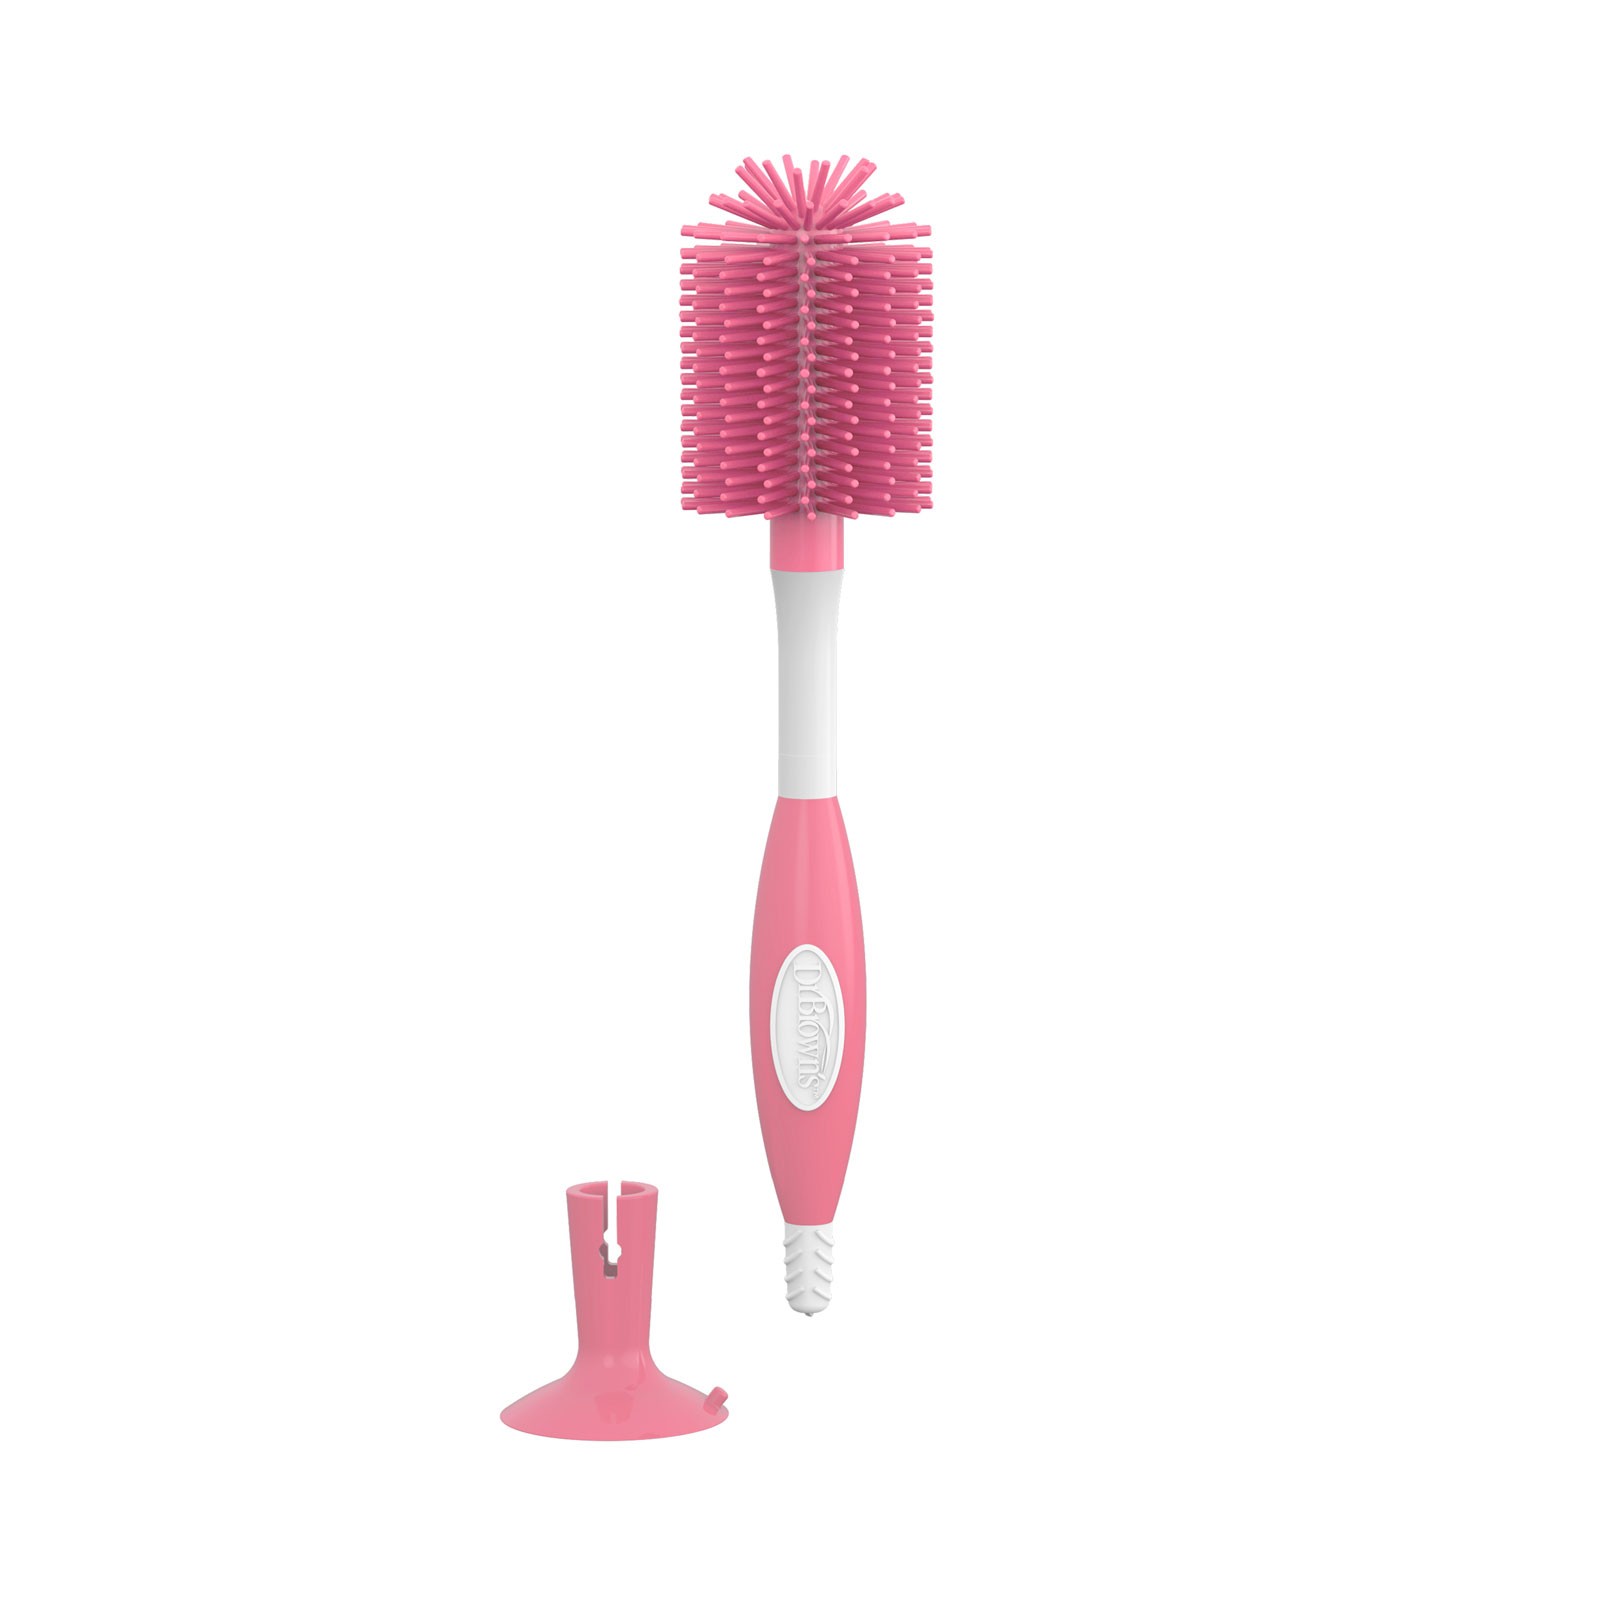 https://www.drbrownsbaby.com/wp-content/uploads/2022/02/AC229_Product_Soft_Touch_Bottle_Brush_Pink_1-Pack_out_of_storage_base.jpg